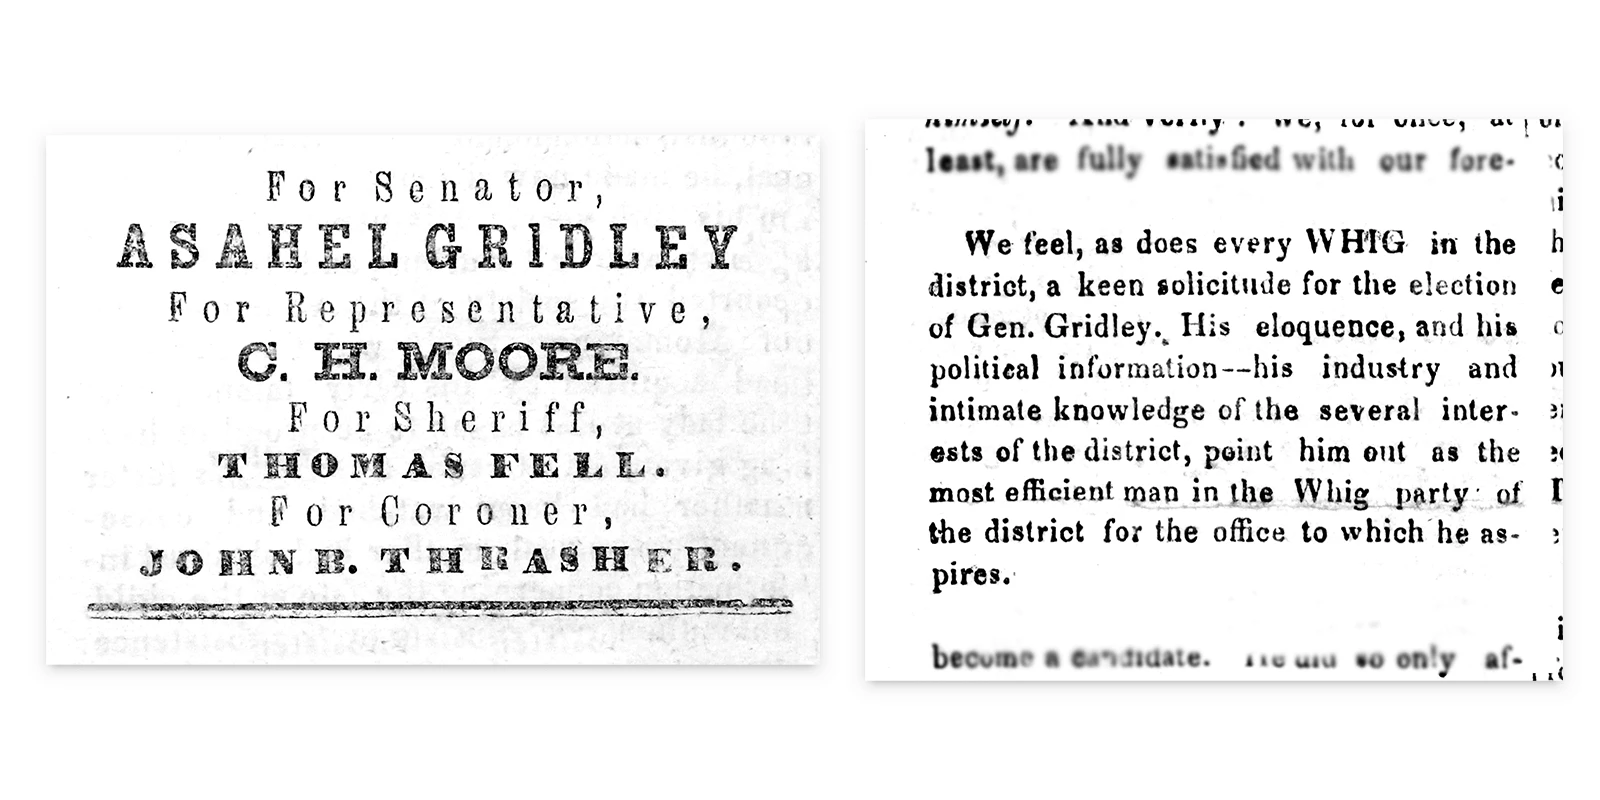 Black and white newspaper clippings from the Blooming Western Whig announcing campaigns. The first reads, For Senatorm Asahel Gridley, for representative, C.H. Moore, for Sheriff, Thomas Fell, for coroner, John B. Thrasher. The second clipping reads, “We feel, as does every WHIG in the district, a keen solicitude for the election of Gen. Gridley. His eloquence, and his political information—his industry and intimate knowledge of the several interests of the district, point him out as the most efficient man in the Whig party of the district for the office to which he aspires.”